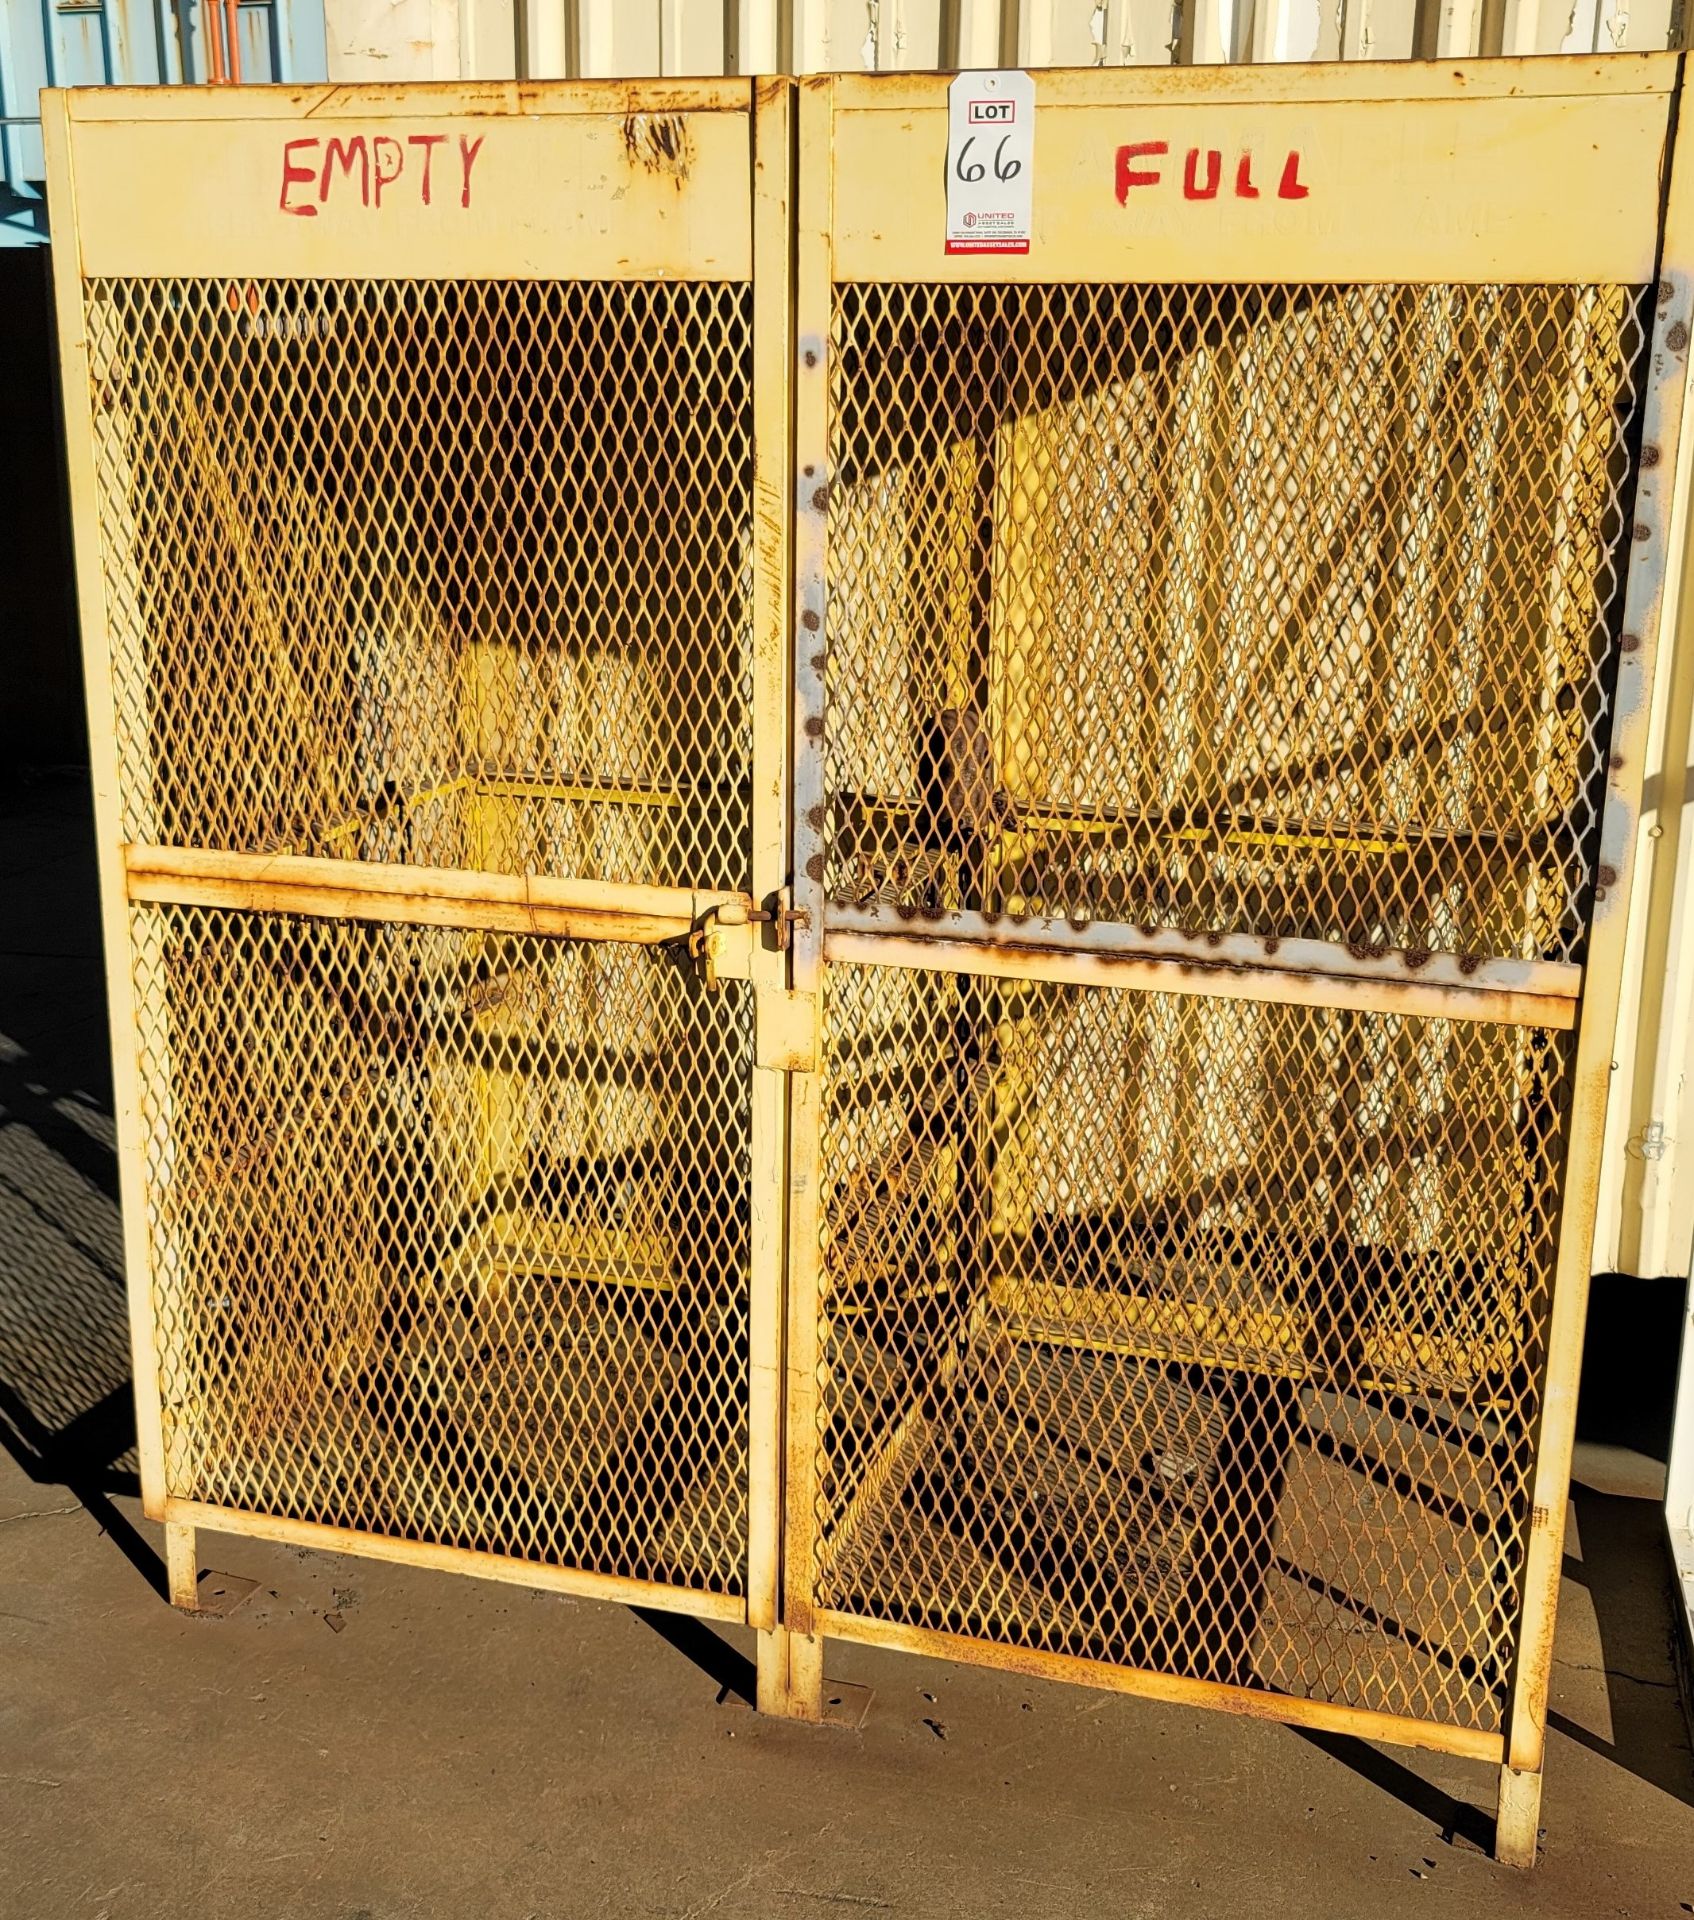 2-DOOR COMPRESSED CYLINDER CAGE, 64" X 38" X 70" (LOCATION: OUTSIDE BUILDING 39)